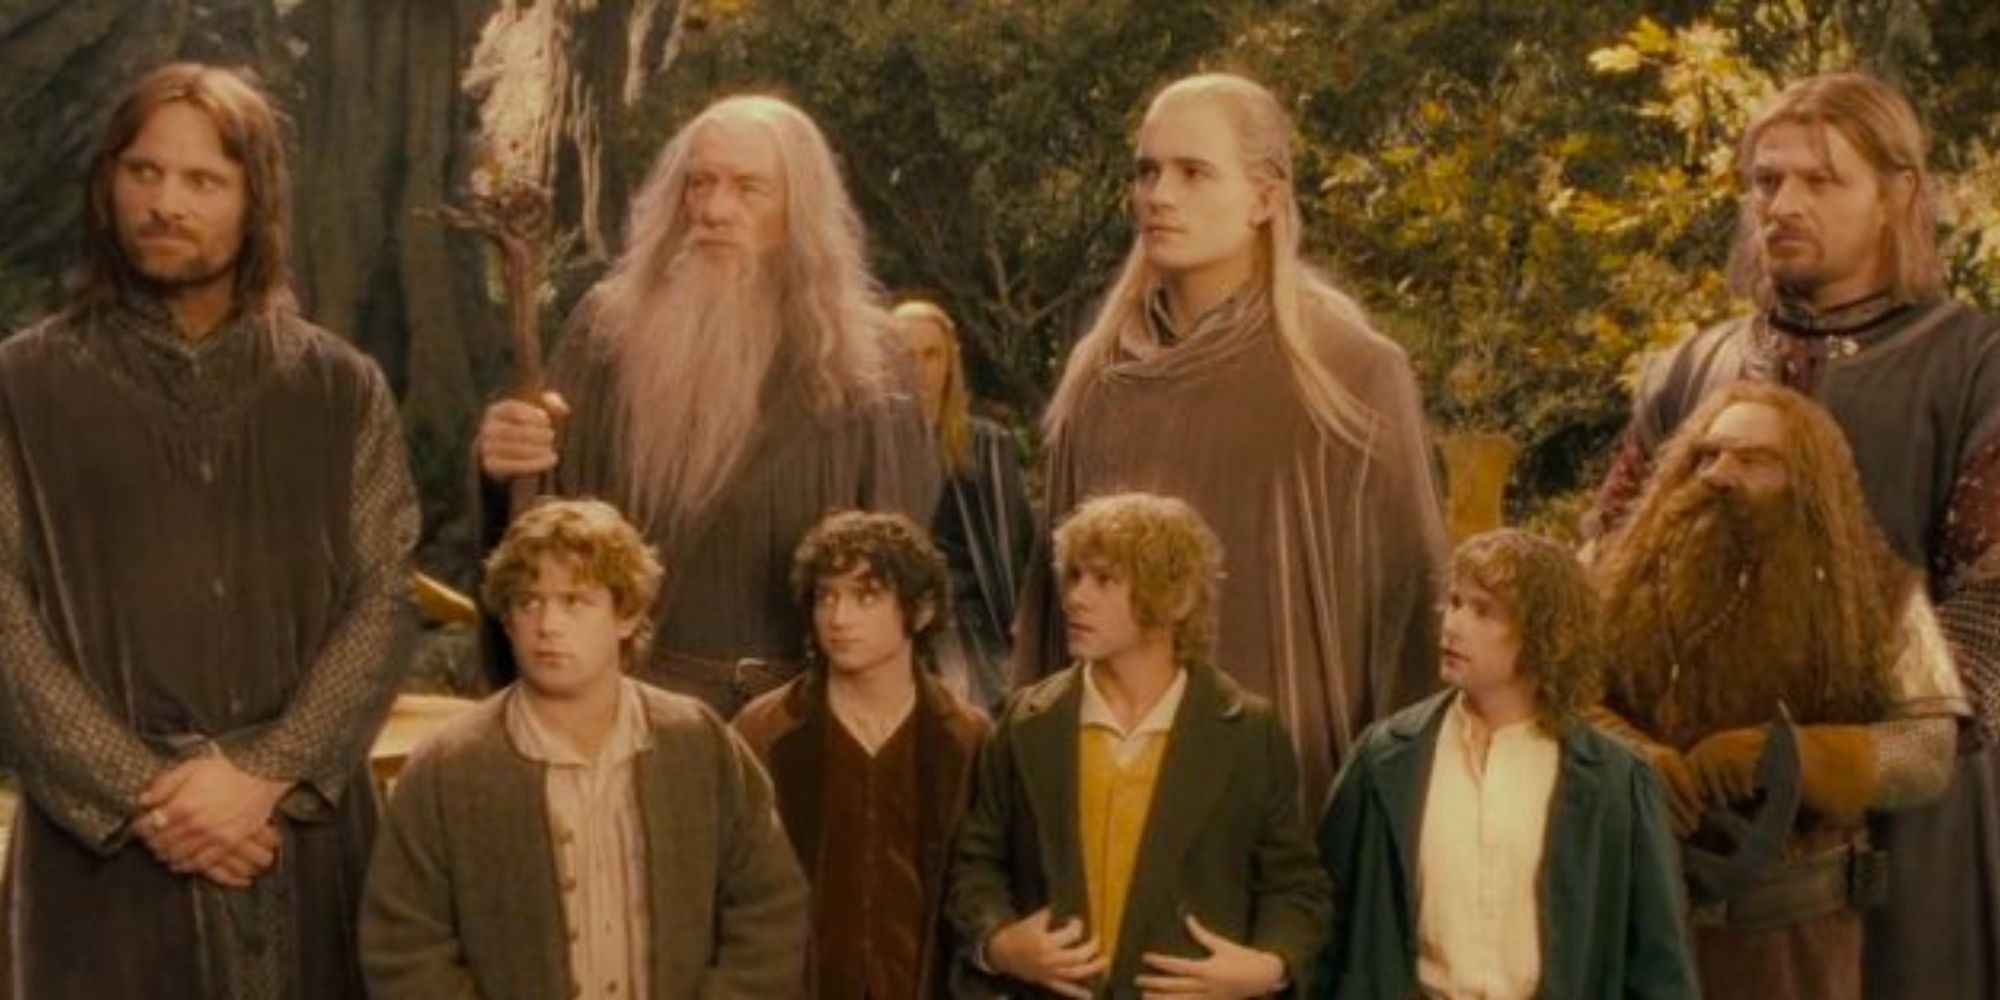 The fellowship in The Lord of the Rings: The Fellowship of the Ring.